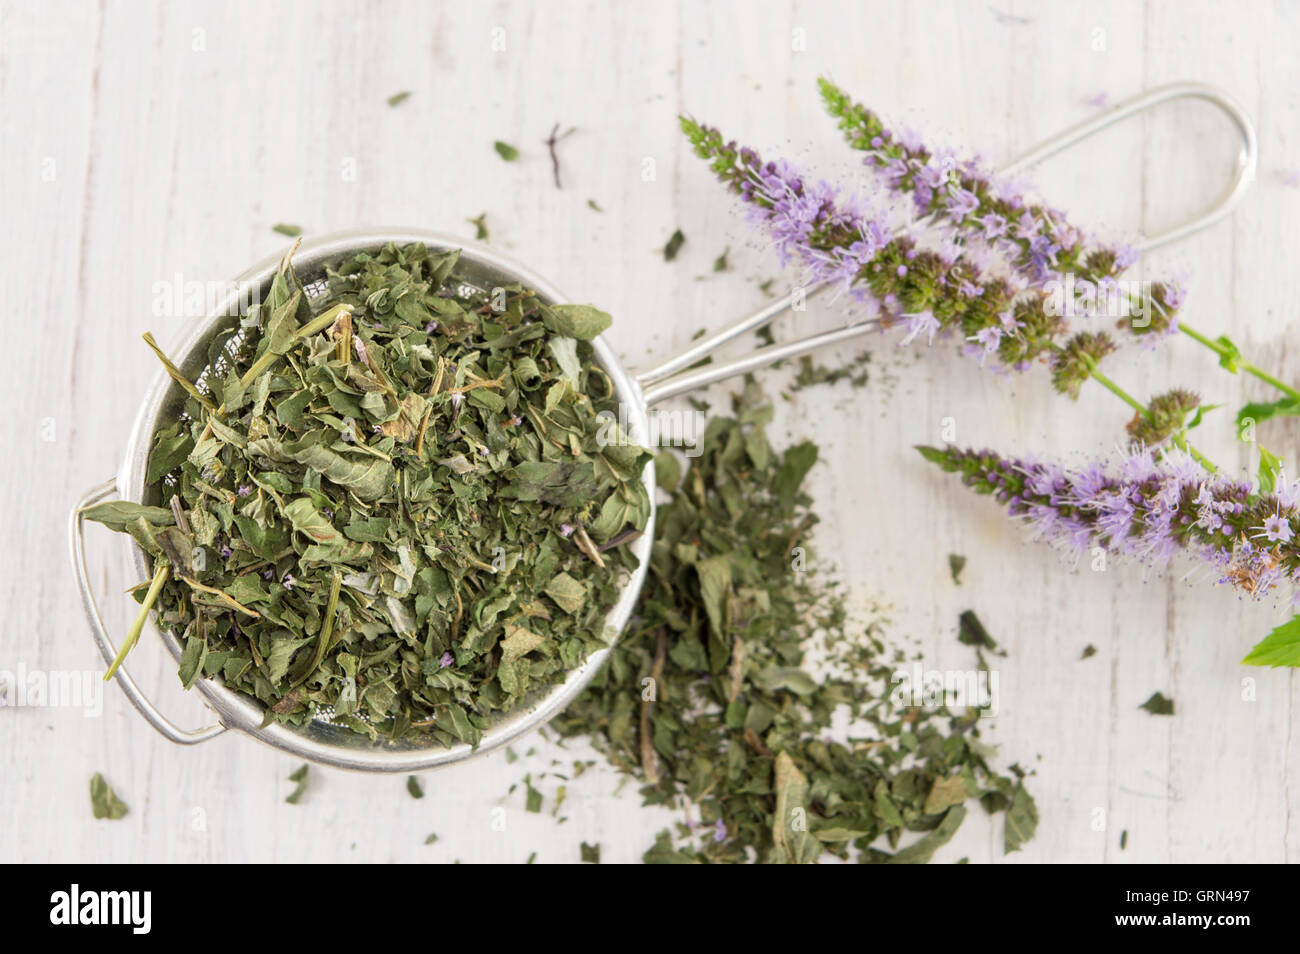 Mint tea herbs with flowers on a wooden table Stock Photo